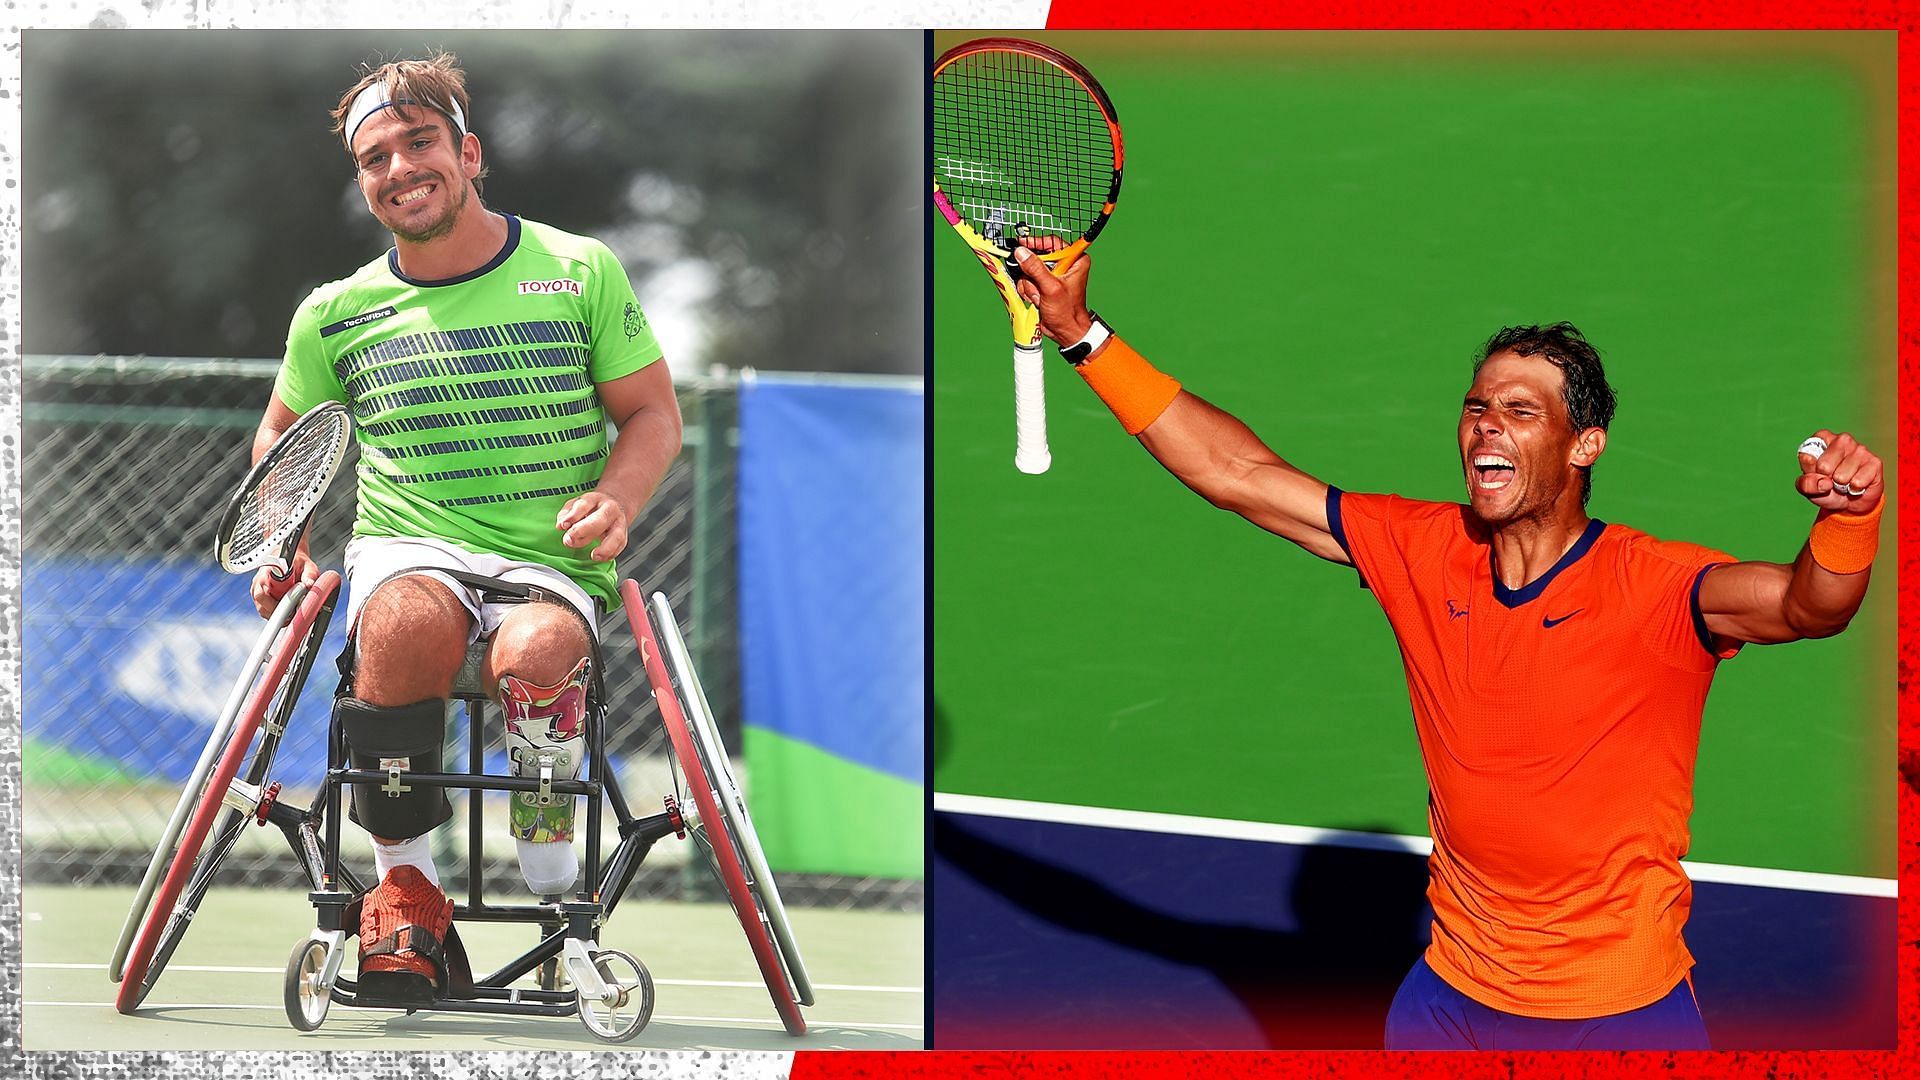 Nadal (right) played an exibition doubles match with De La Fuente in Chile last month.